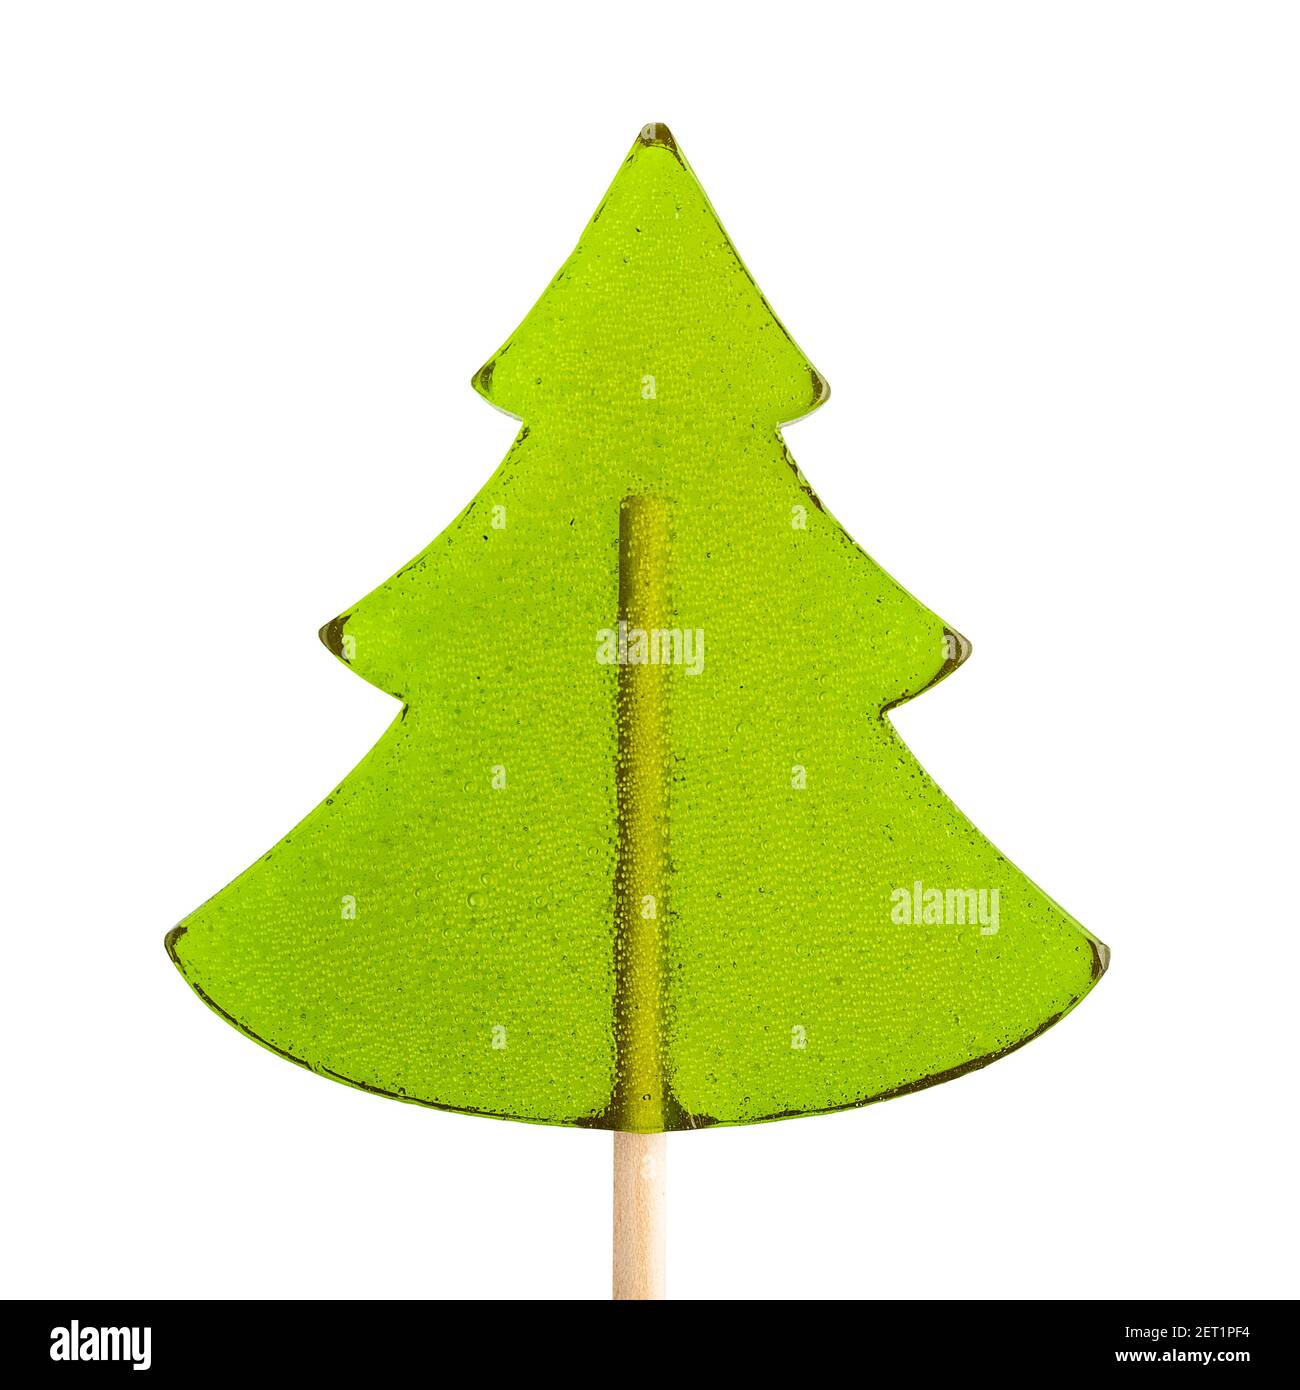 Sweet lollipop in the form of a green Christmas tree on a white background Stock Photo